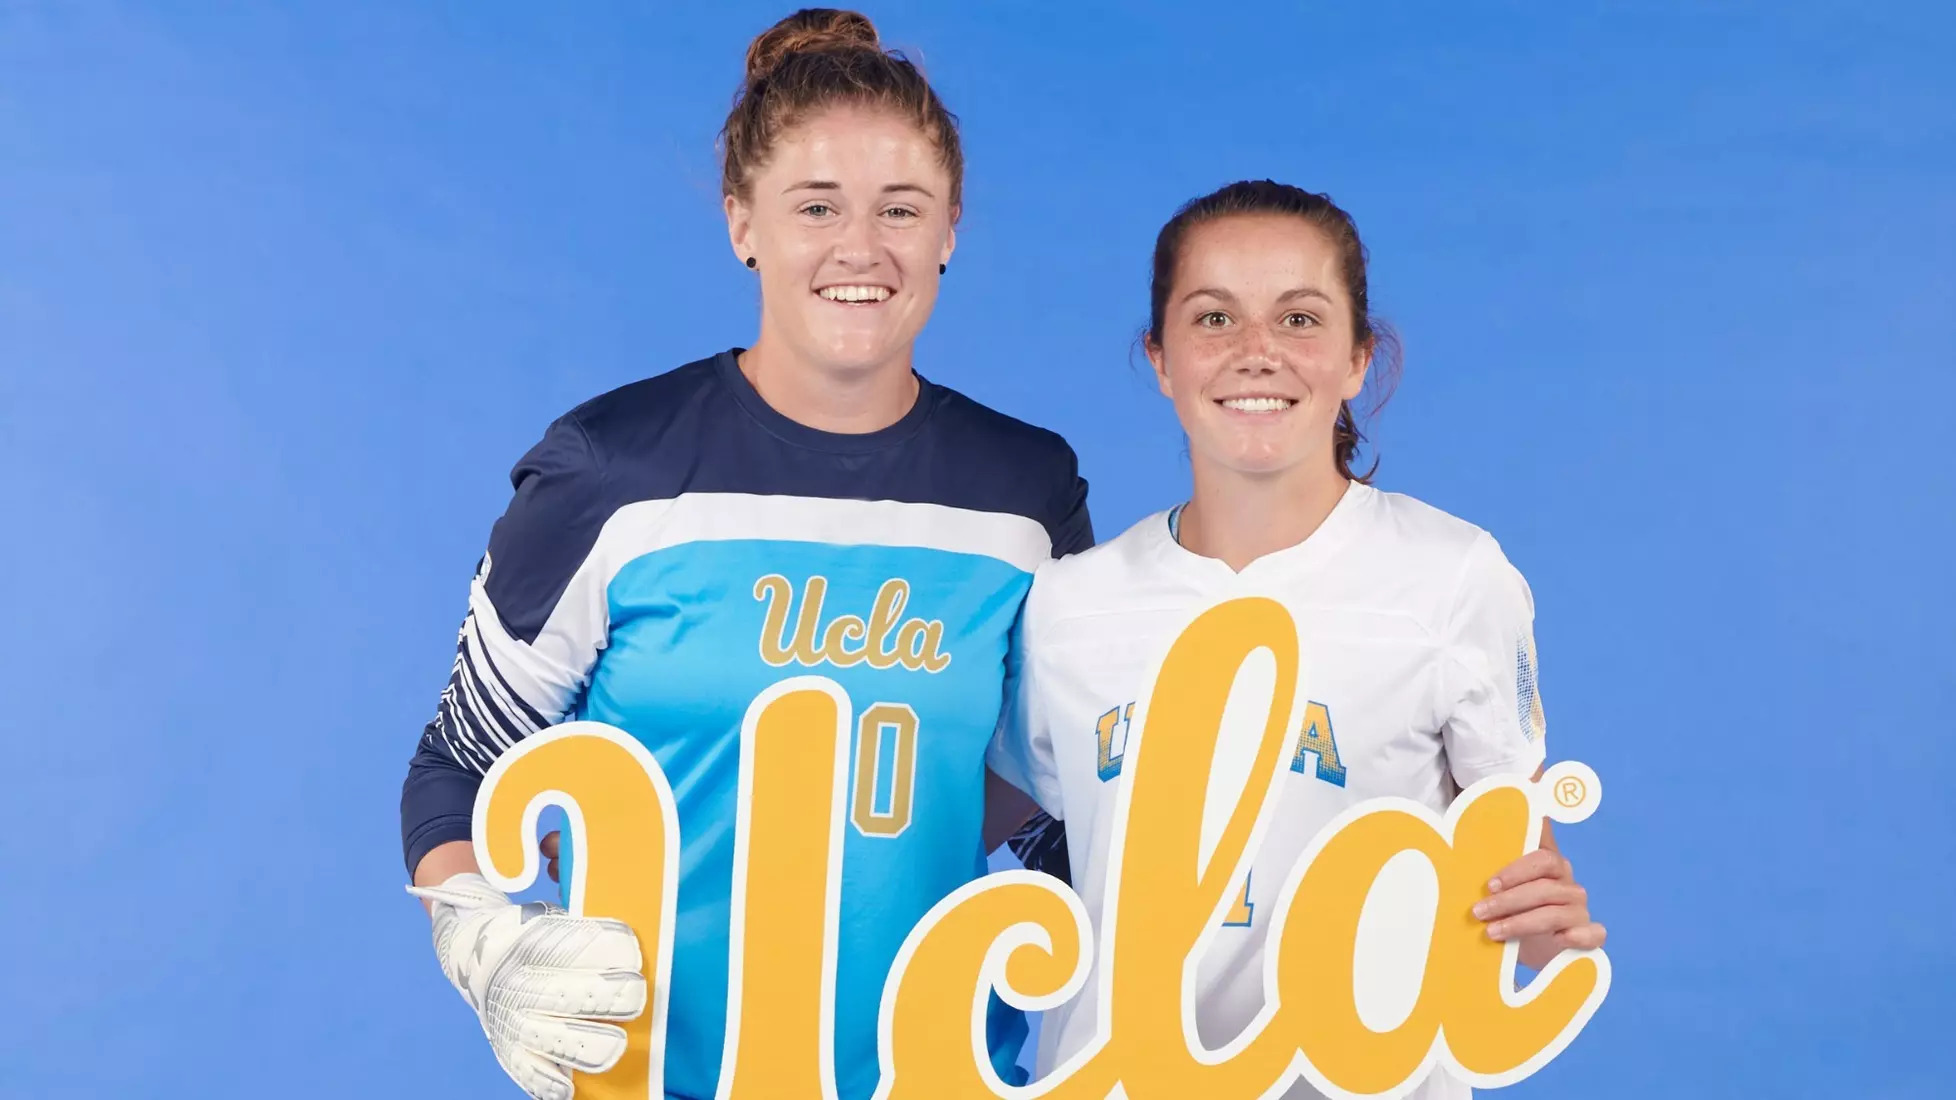 Two young women, on the left, Teagan Micah wearing a goalkeeper's gloves and uniform, on the right, Jessie Fleming with a field player uniform, holding a UCLA sign and smiling